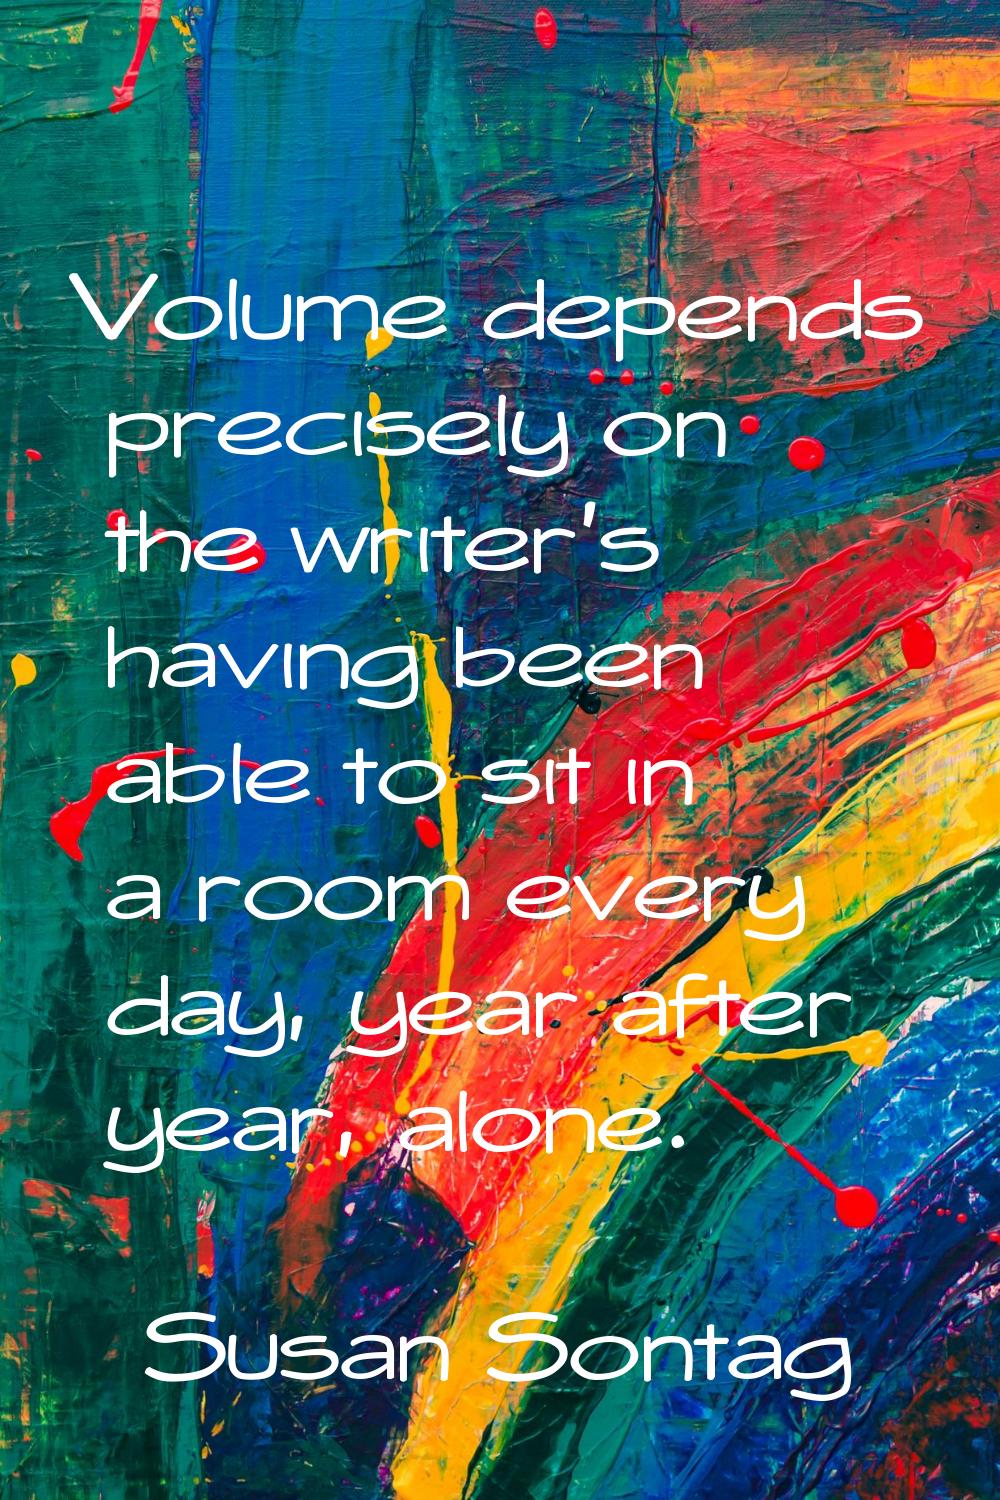 Volume depends precisely on the writer's having been able to sit in a room every day, year after ye